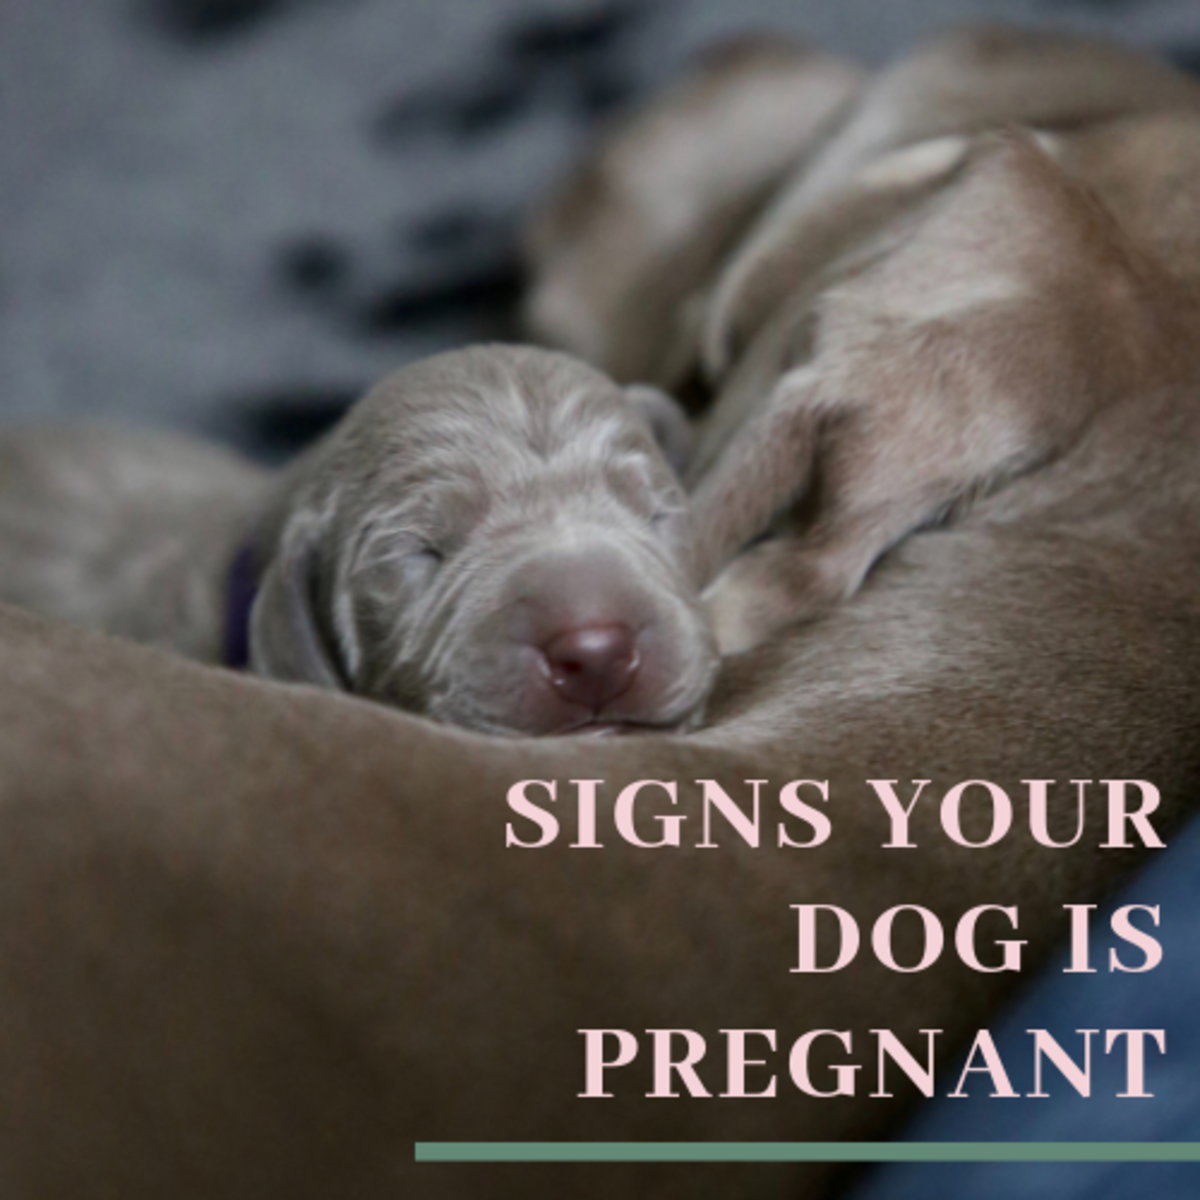 how can you tell when your dog is done giving birth